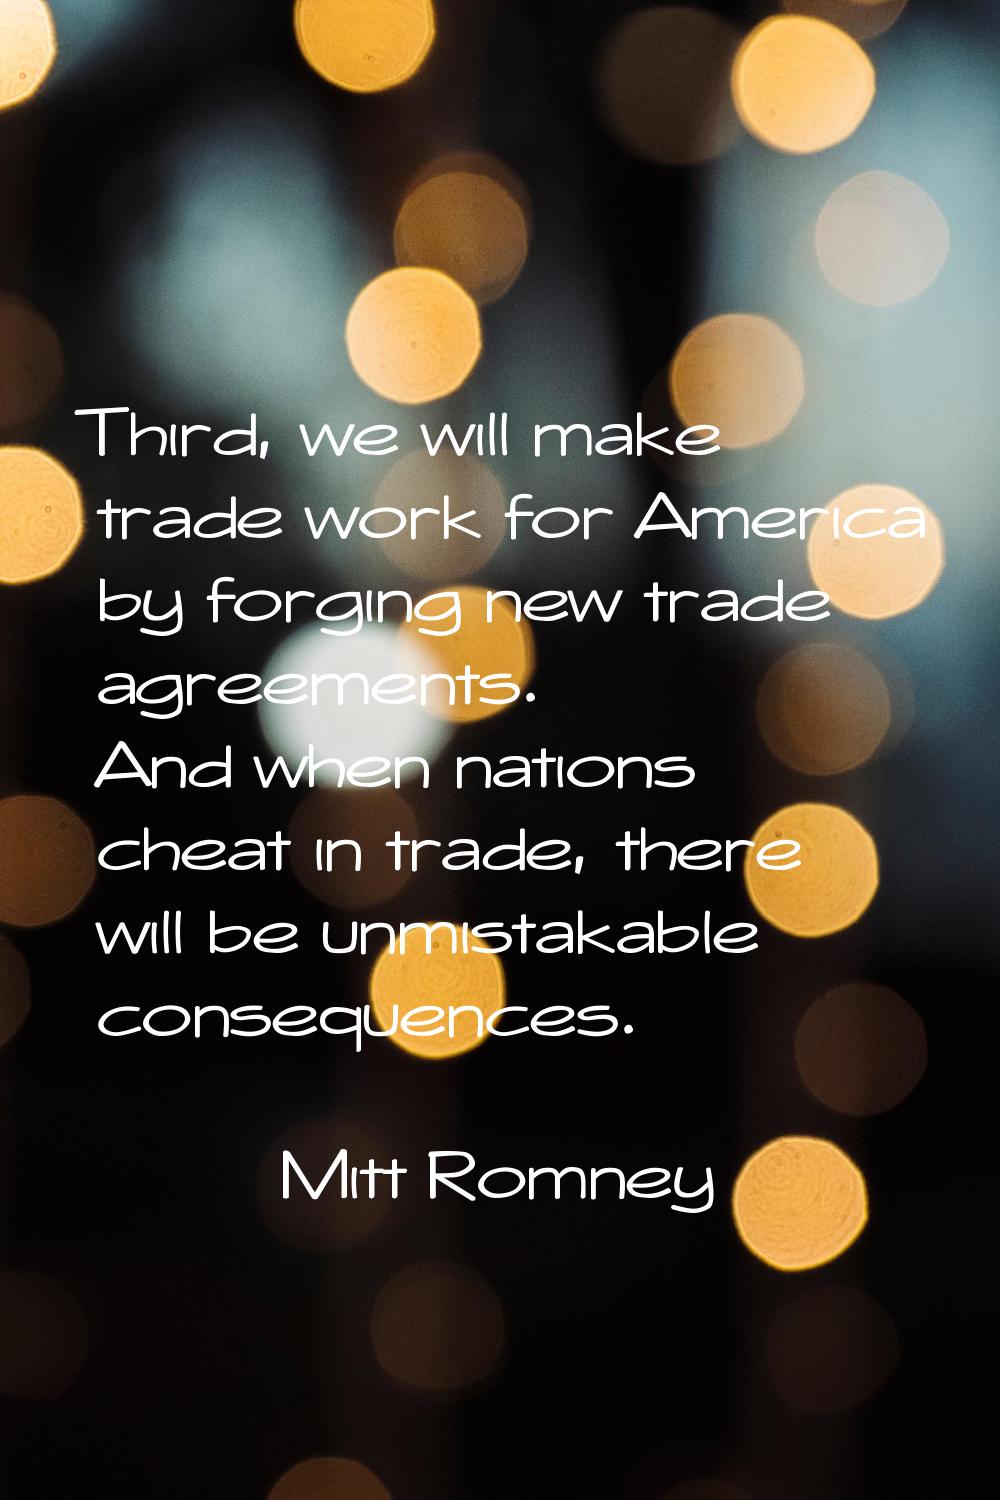 Third, we will make trade work for America by forging new trade agreements. And when nations cheat 